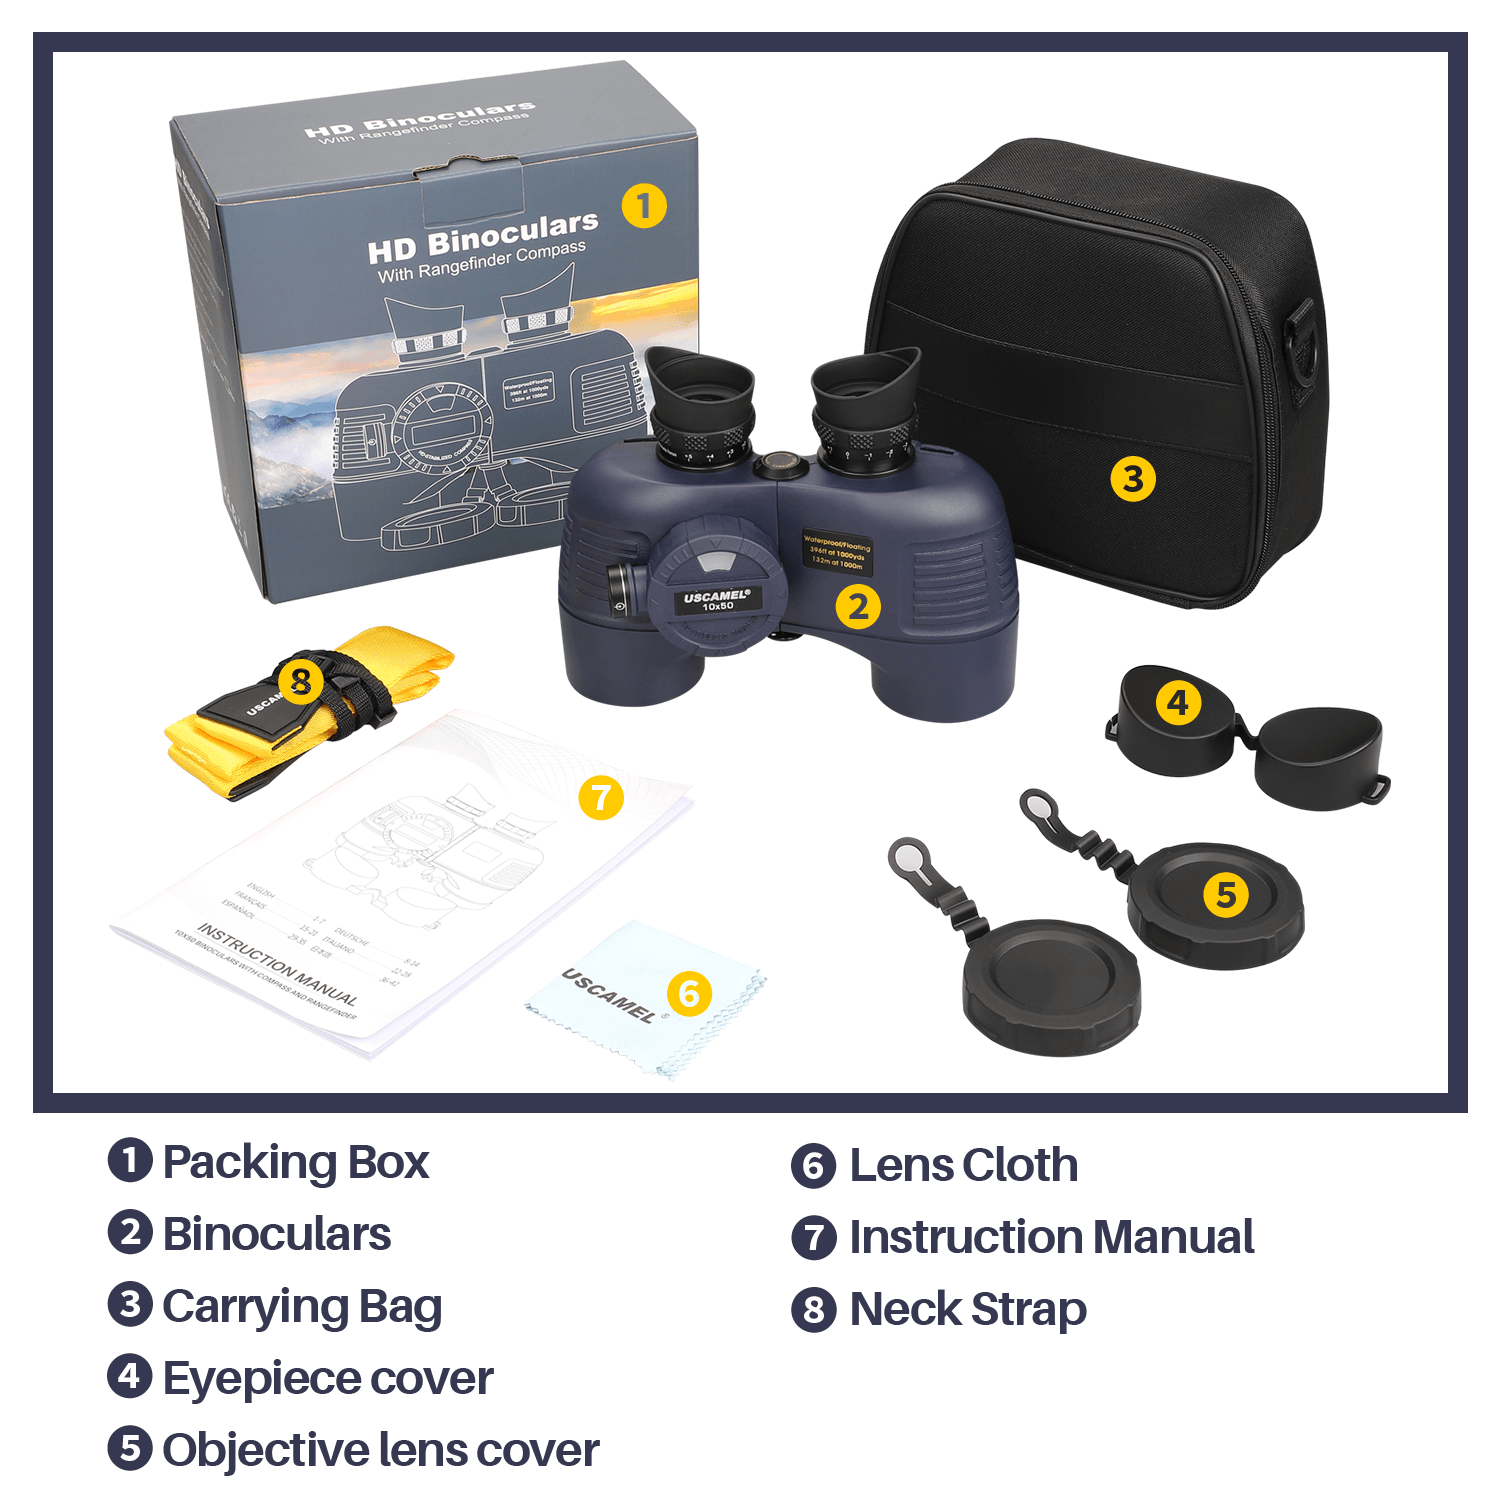 UW119-PACAKGE_INCLUDES,a main product, a carrying bag, a lens cloth, a manual, a neck strap, and covers for eyepieces and objective lens